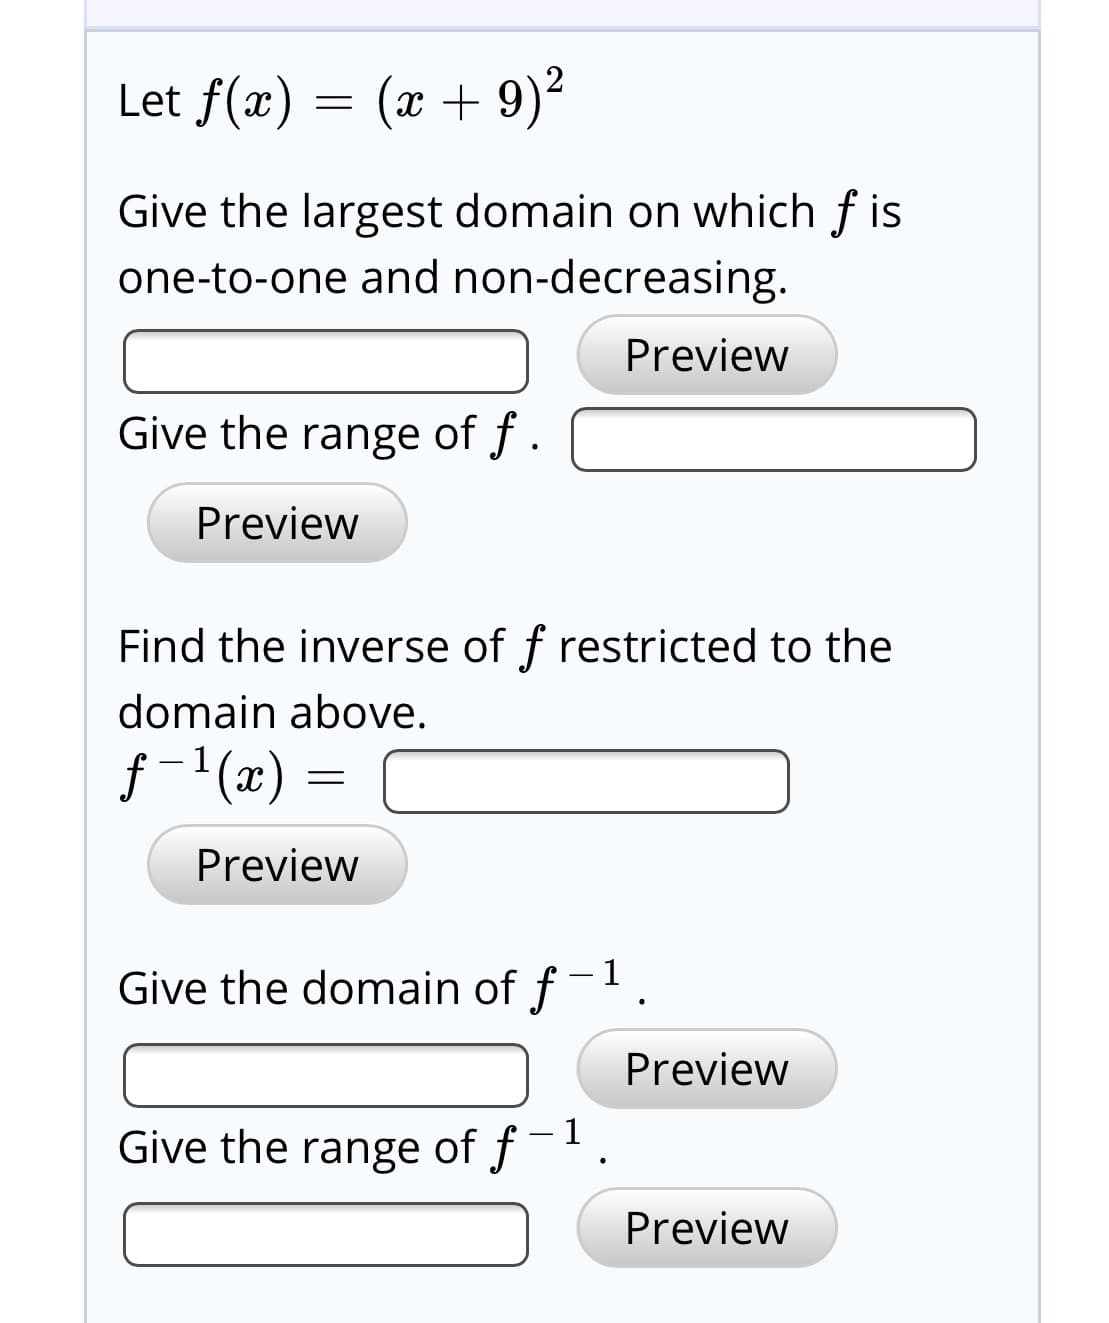 Let f(x) = (x + 9)2
Give the largest domain on which f is
one-to-one and non-decreasing.
Preview
Give the range of f .
Preview
Find the inverse of f restricted to the
domain above.
f -1(x) =
Preview
Give the domain of f
Preview
Give the range of f
Preview
